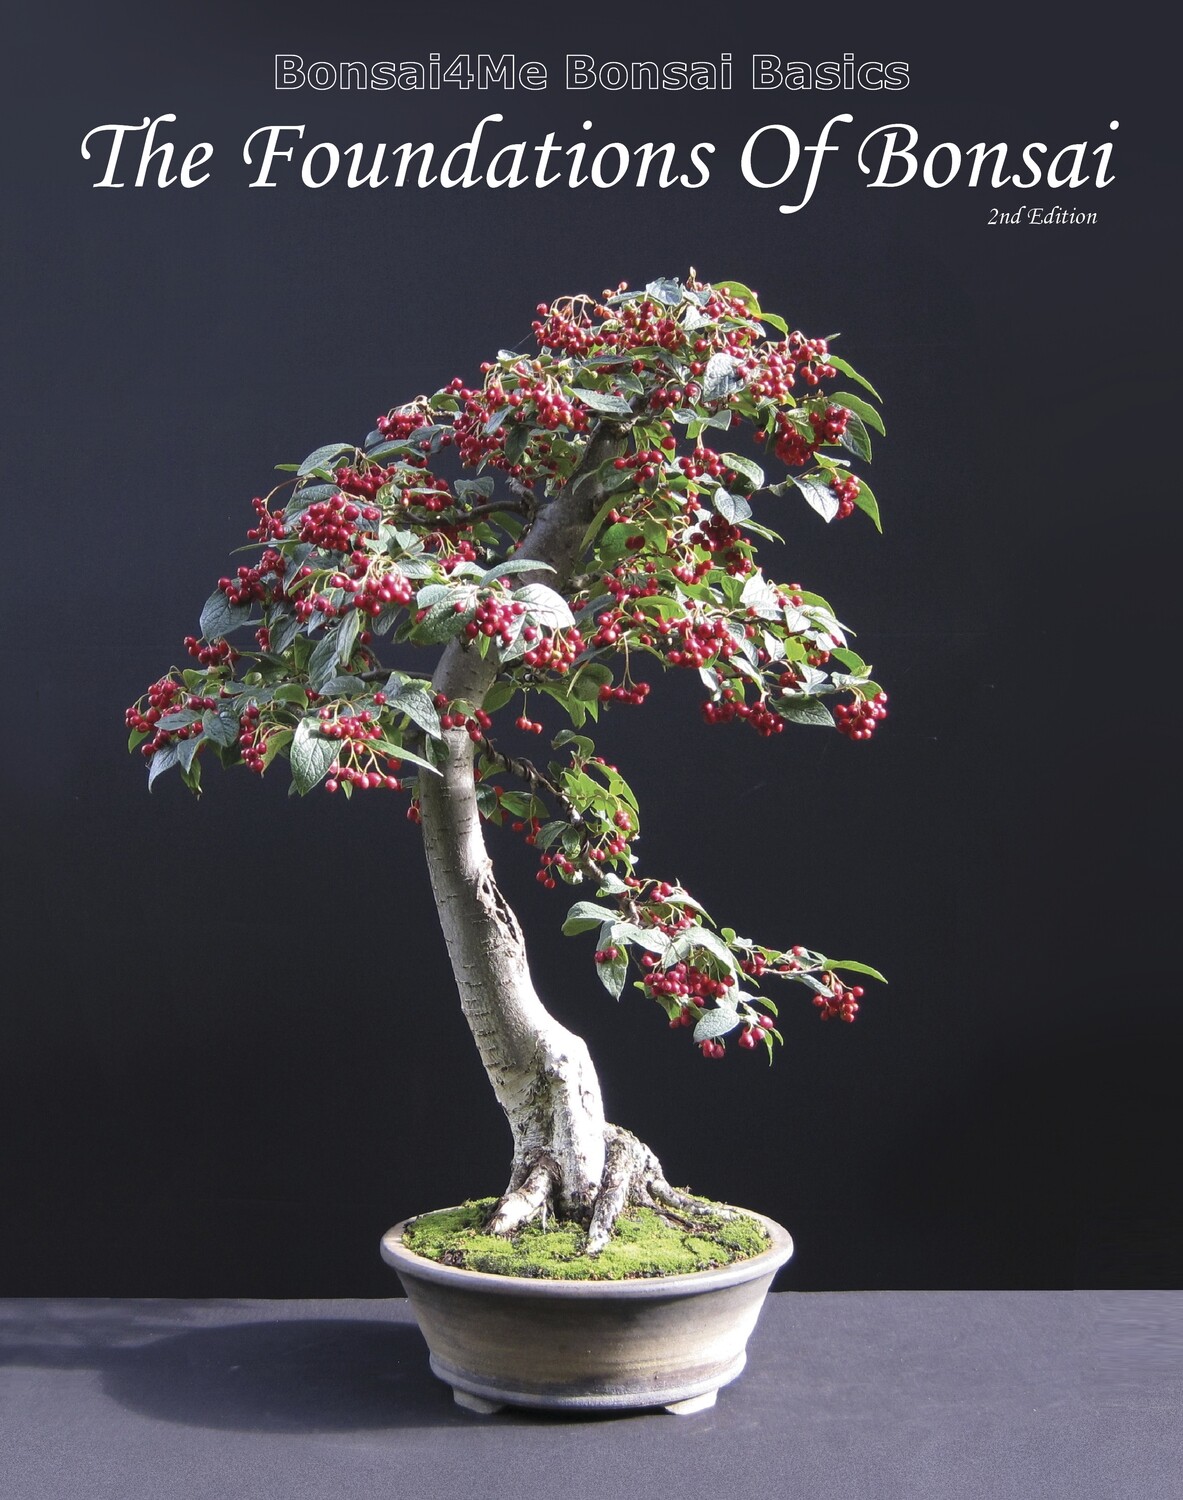 The Foundations of Bonsai 2nd Edition OUT NOW!